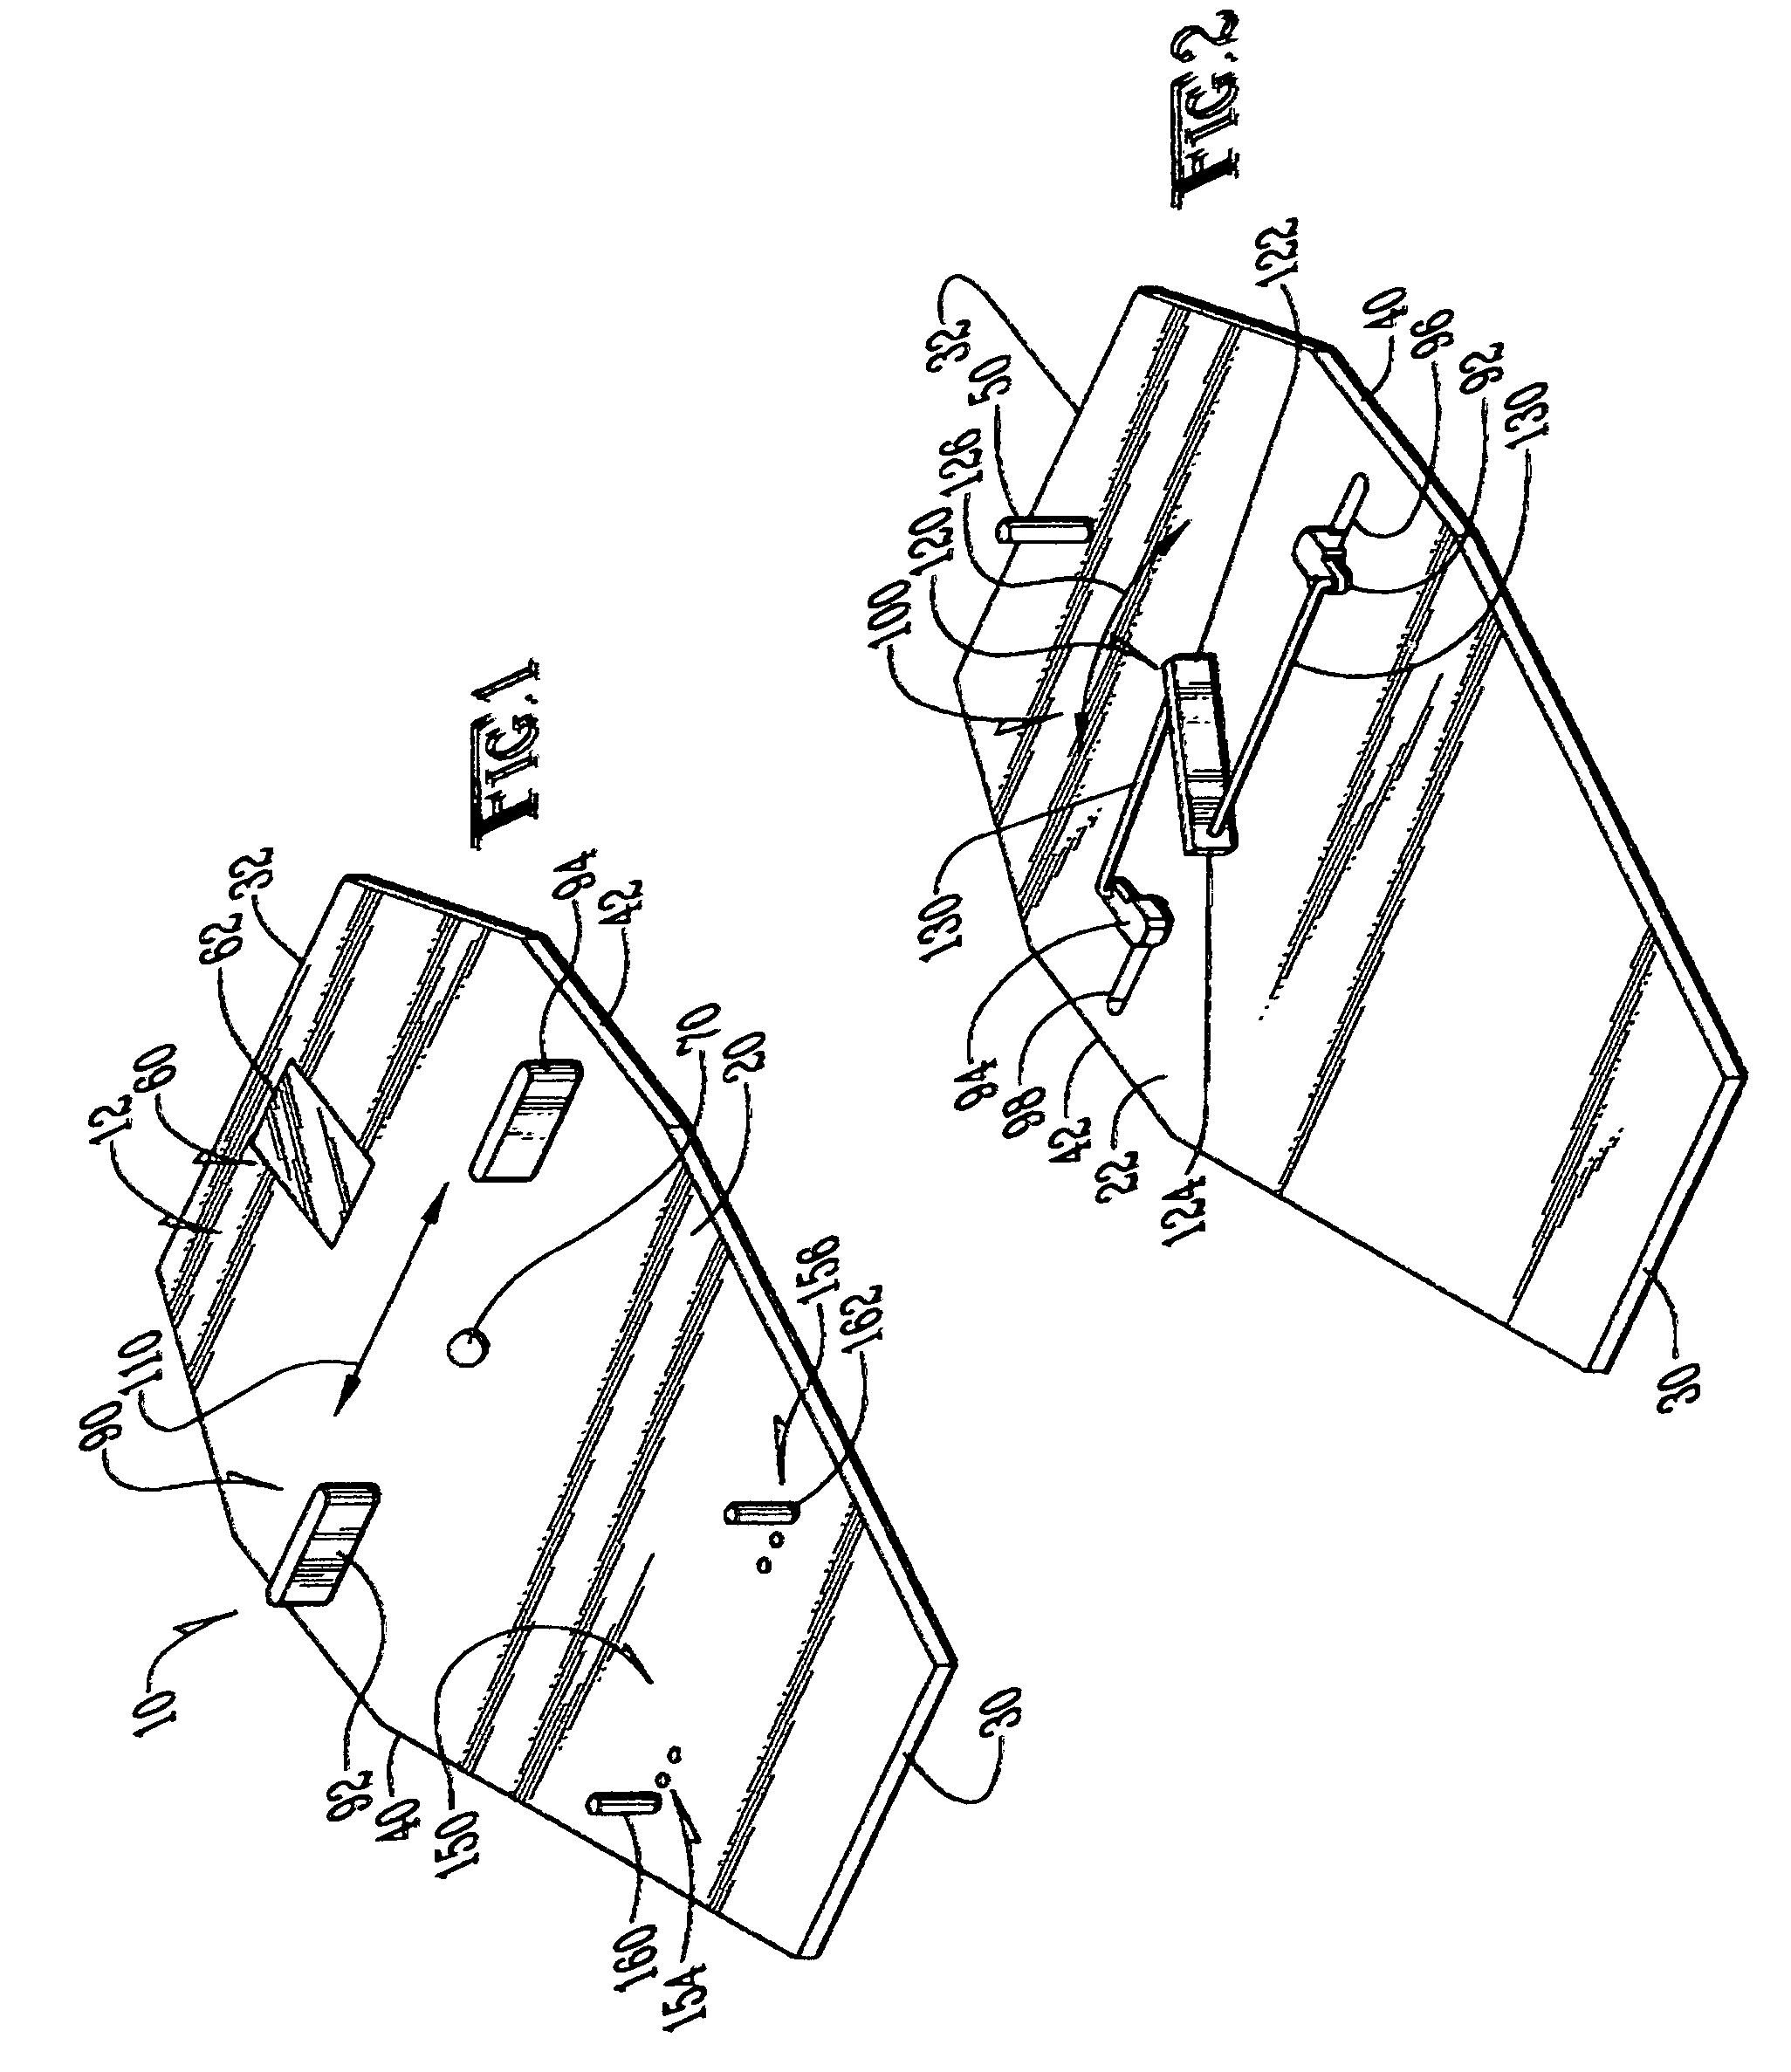 Golf putting teaching device and method